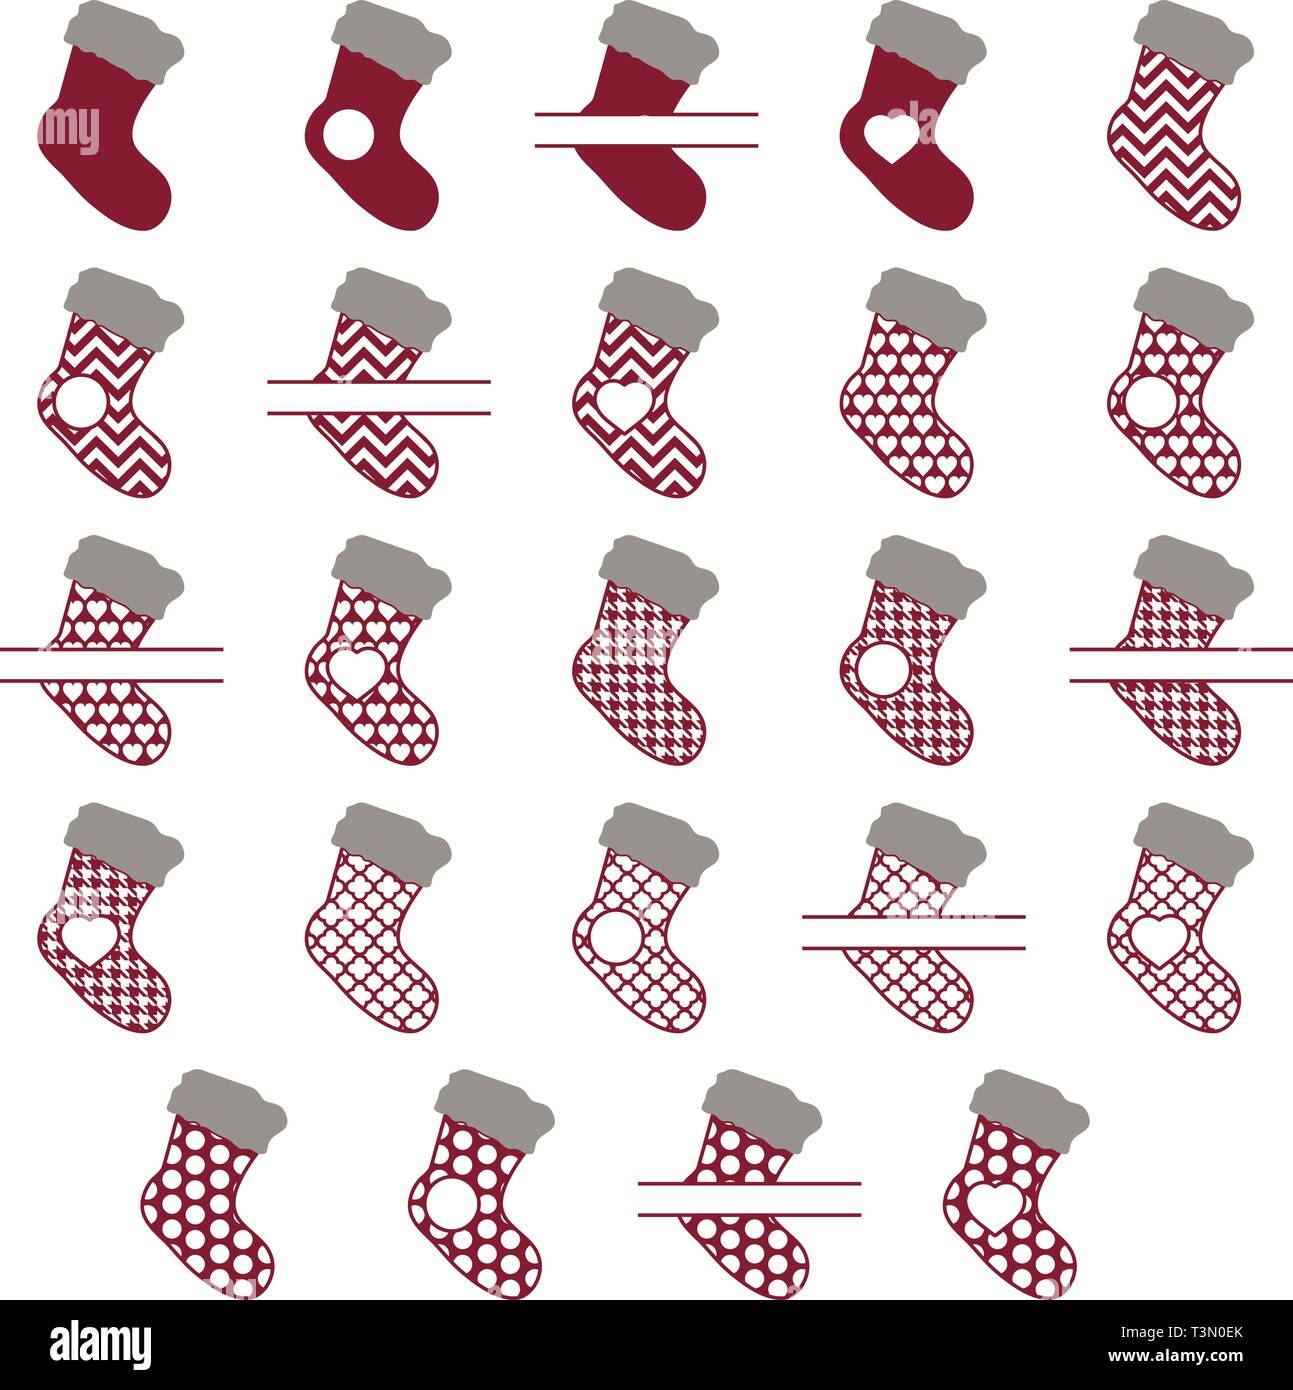 Three Christmas Stockings With Funny Drawings Stickers Cliparts For Xmas  Red Green Socks With Snowman Snowflakes Polar Bear In Hat Hanging Stockings  Isolated On White Background Vector Stock Illustration - Download Image